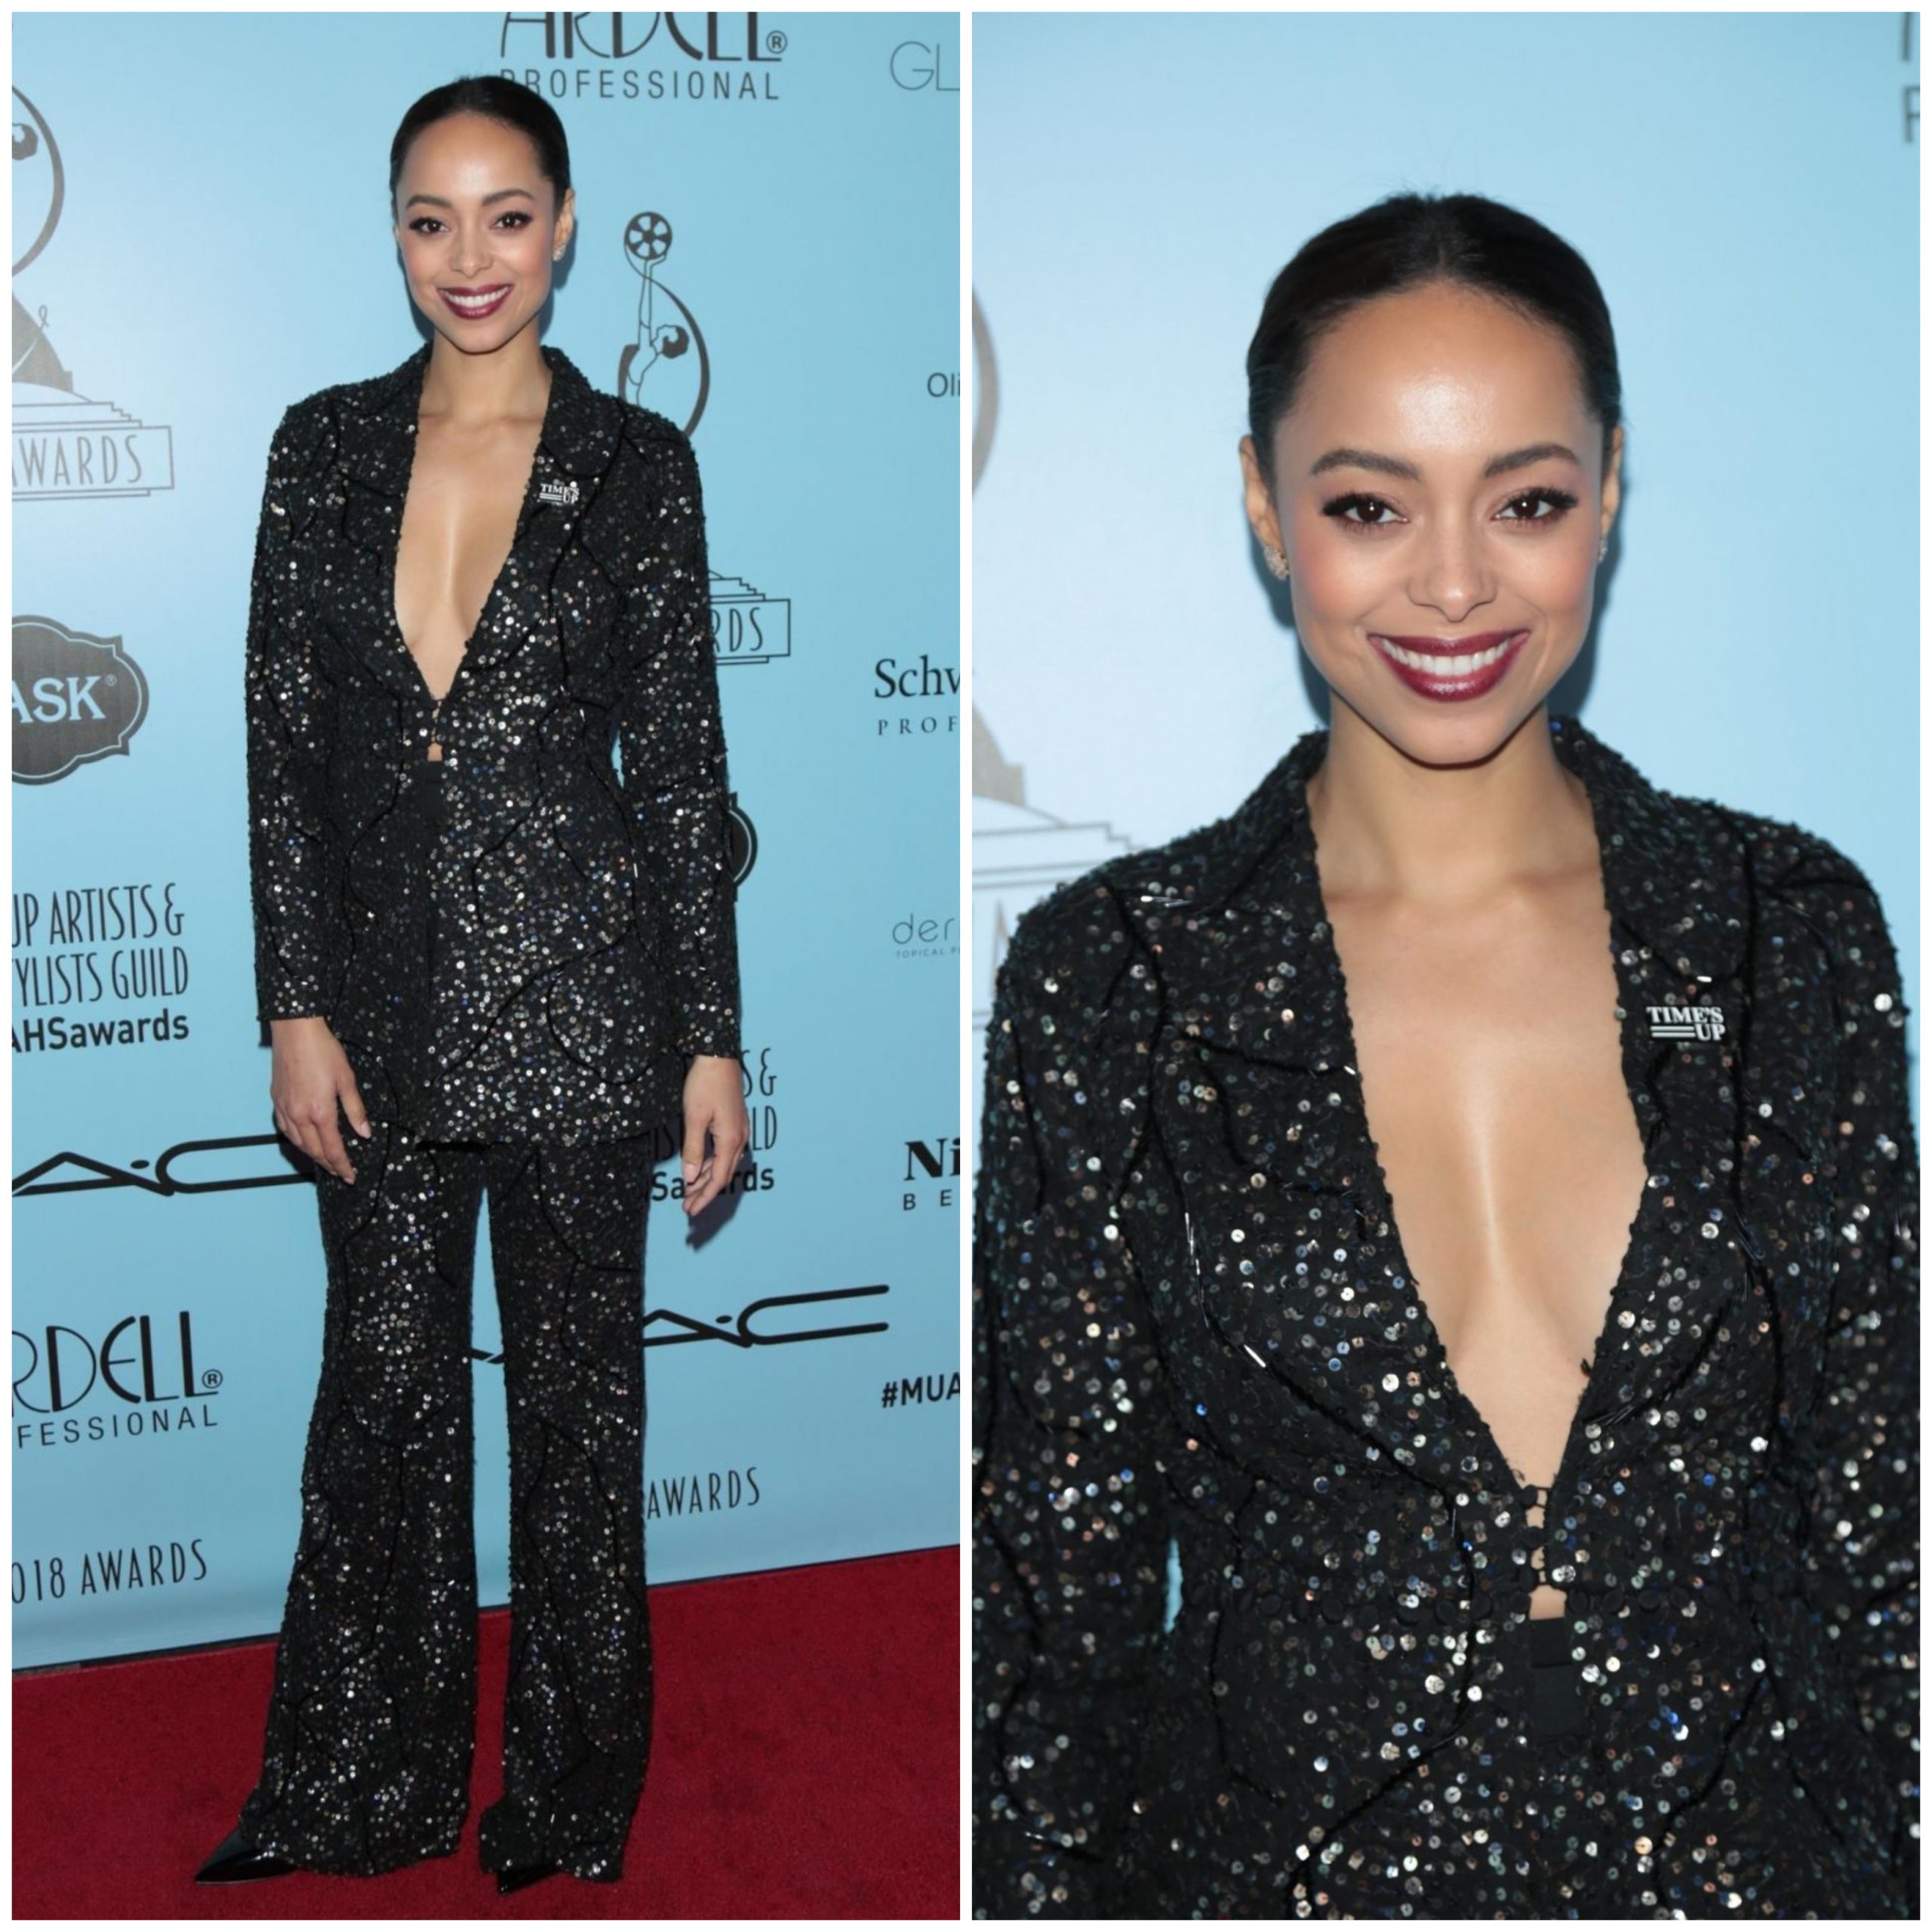 Amber Stevens West In Black Shimmery Sequence Blazer With Pants Outfits At Make-Up Artist & Hair Stylist Guild Awards in LA